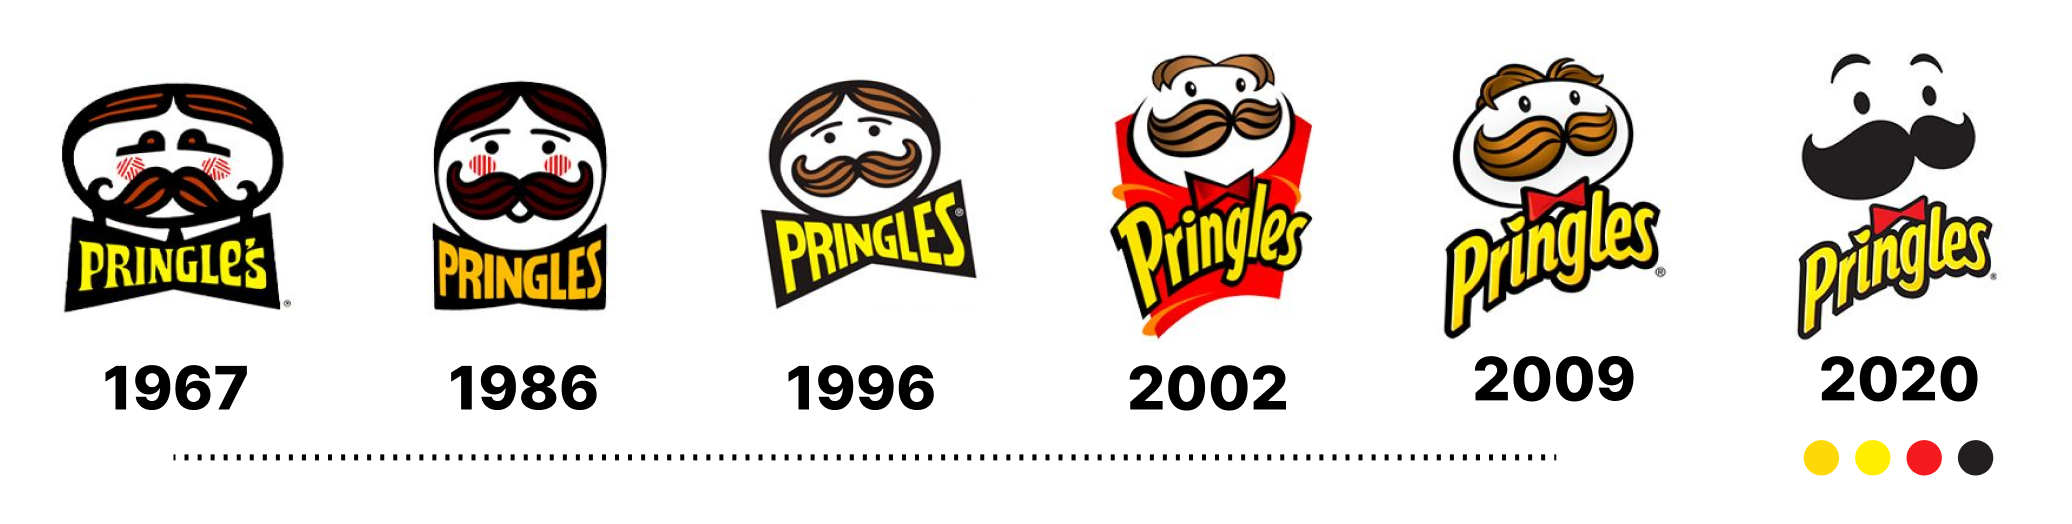 0 Result Images of Pringles New Logo Vs Old - PNG Image Collection